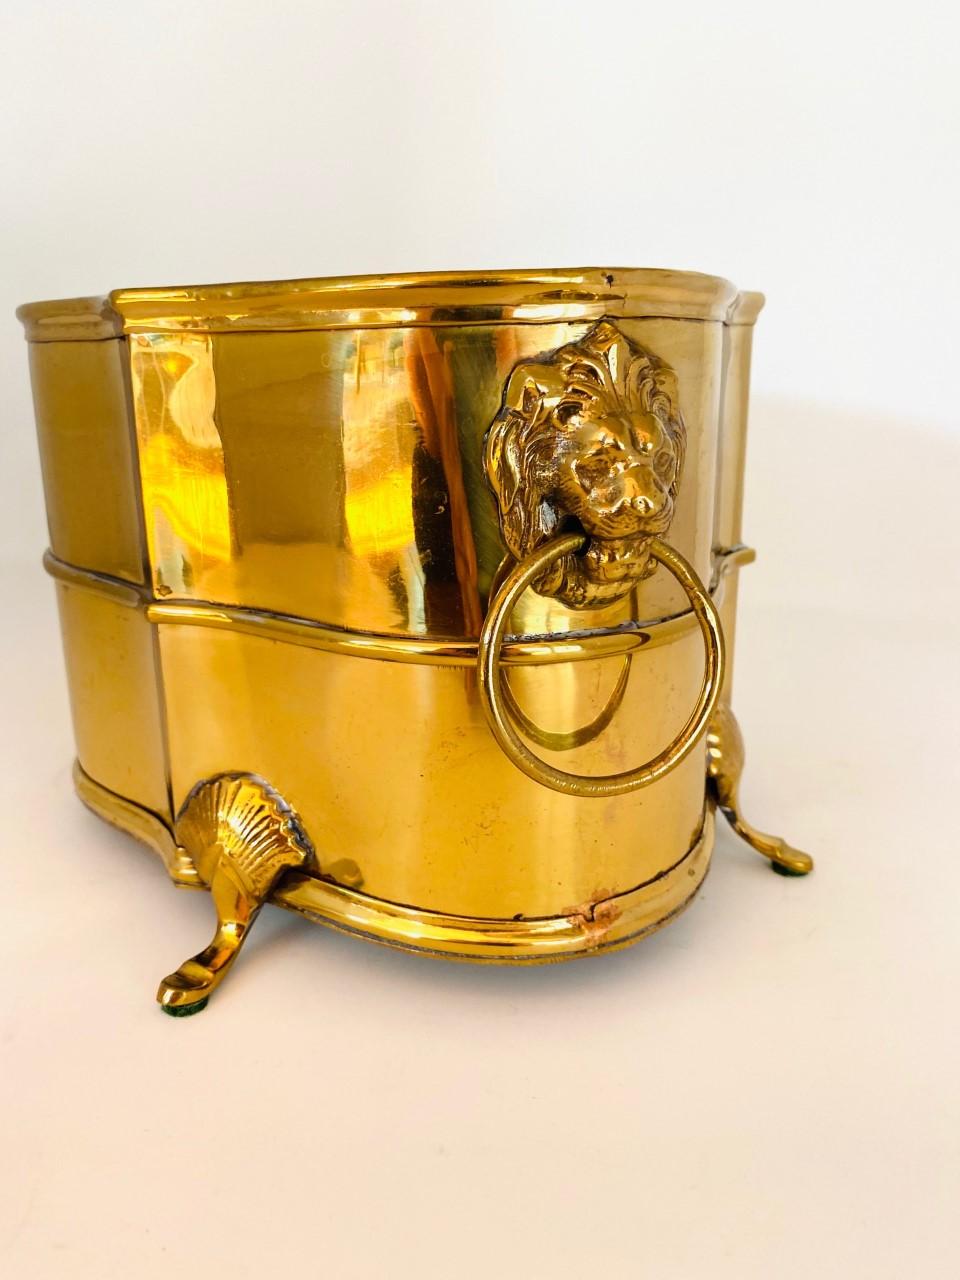 Antique Brass Jardiniere Planter with Lion Head and Feet Details For Sale 9